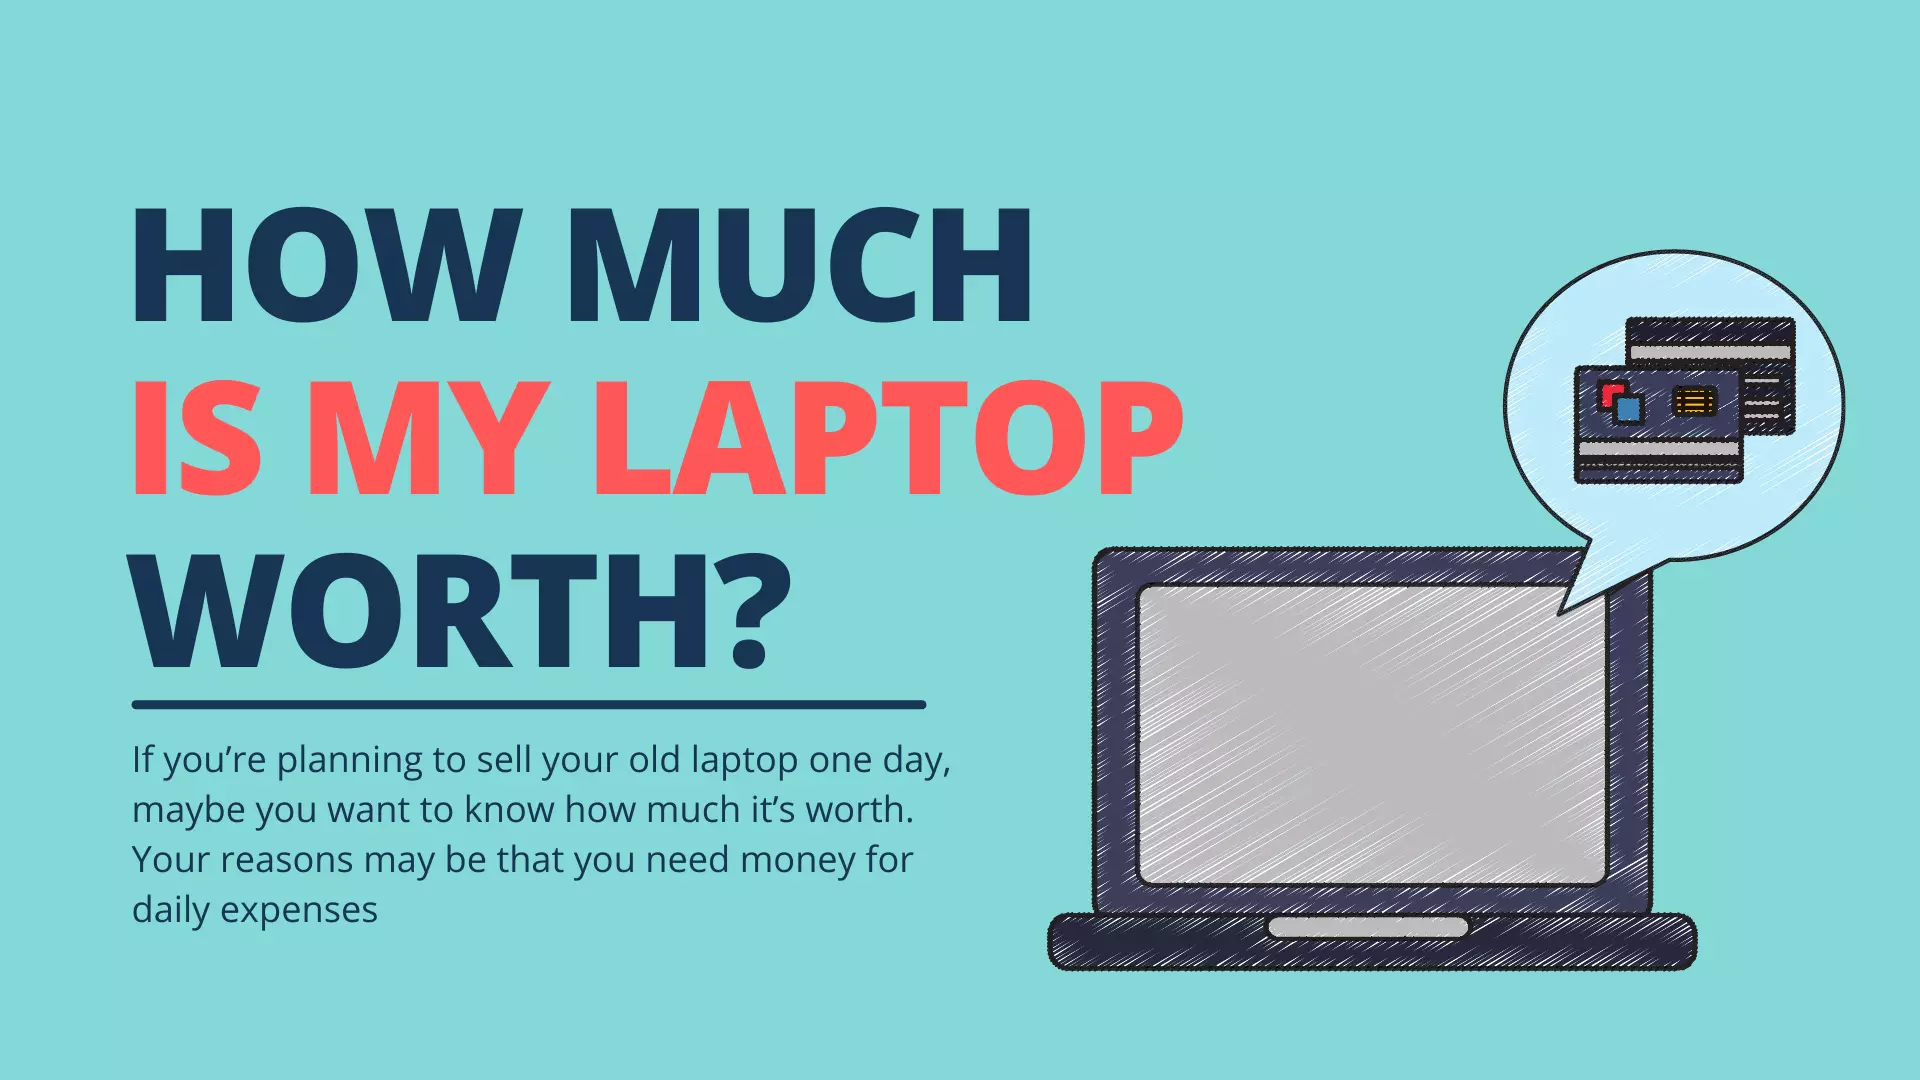 How Much is My Laptop Worth